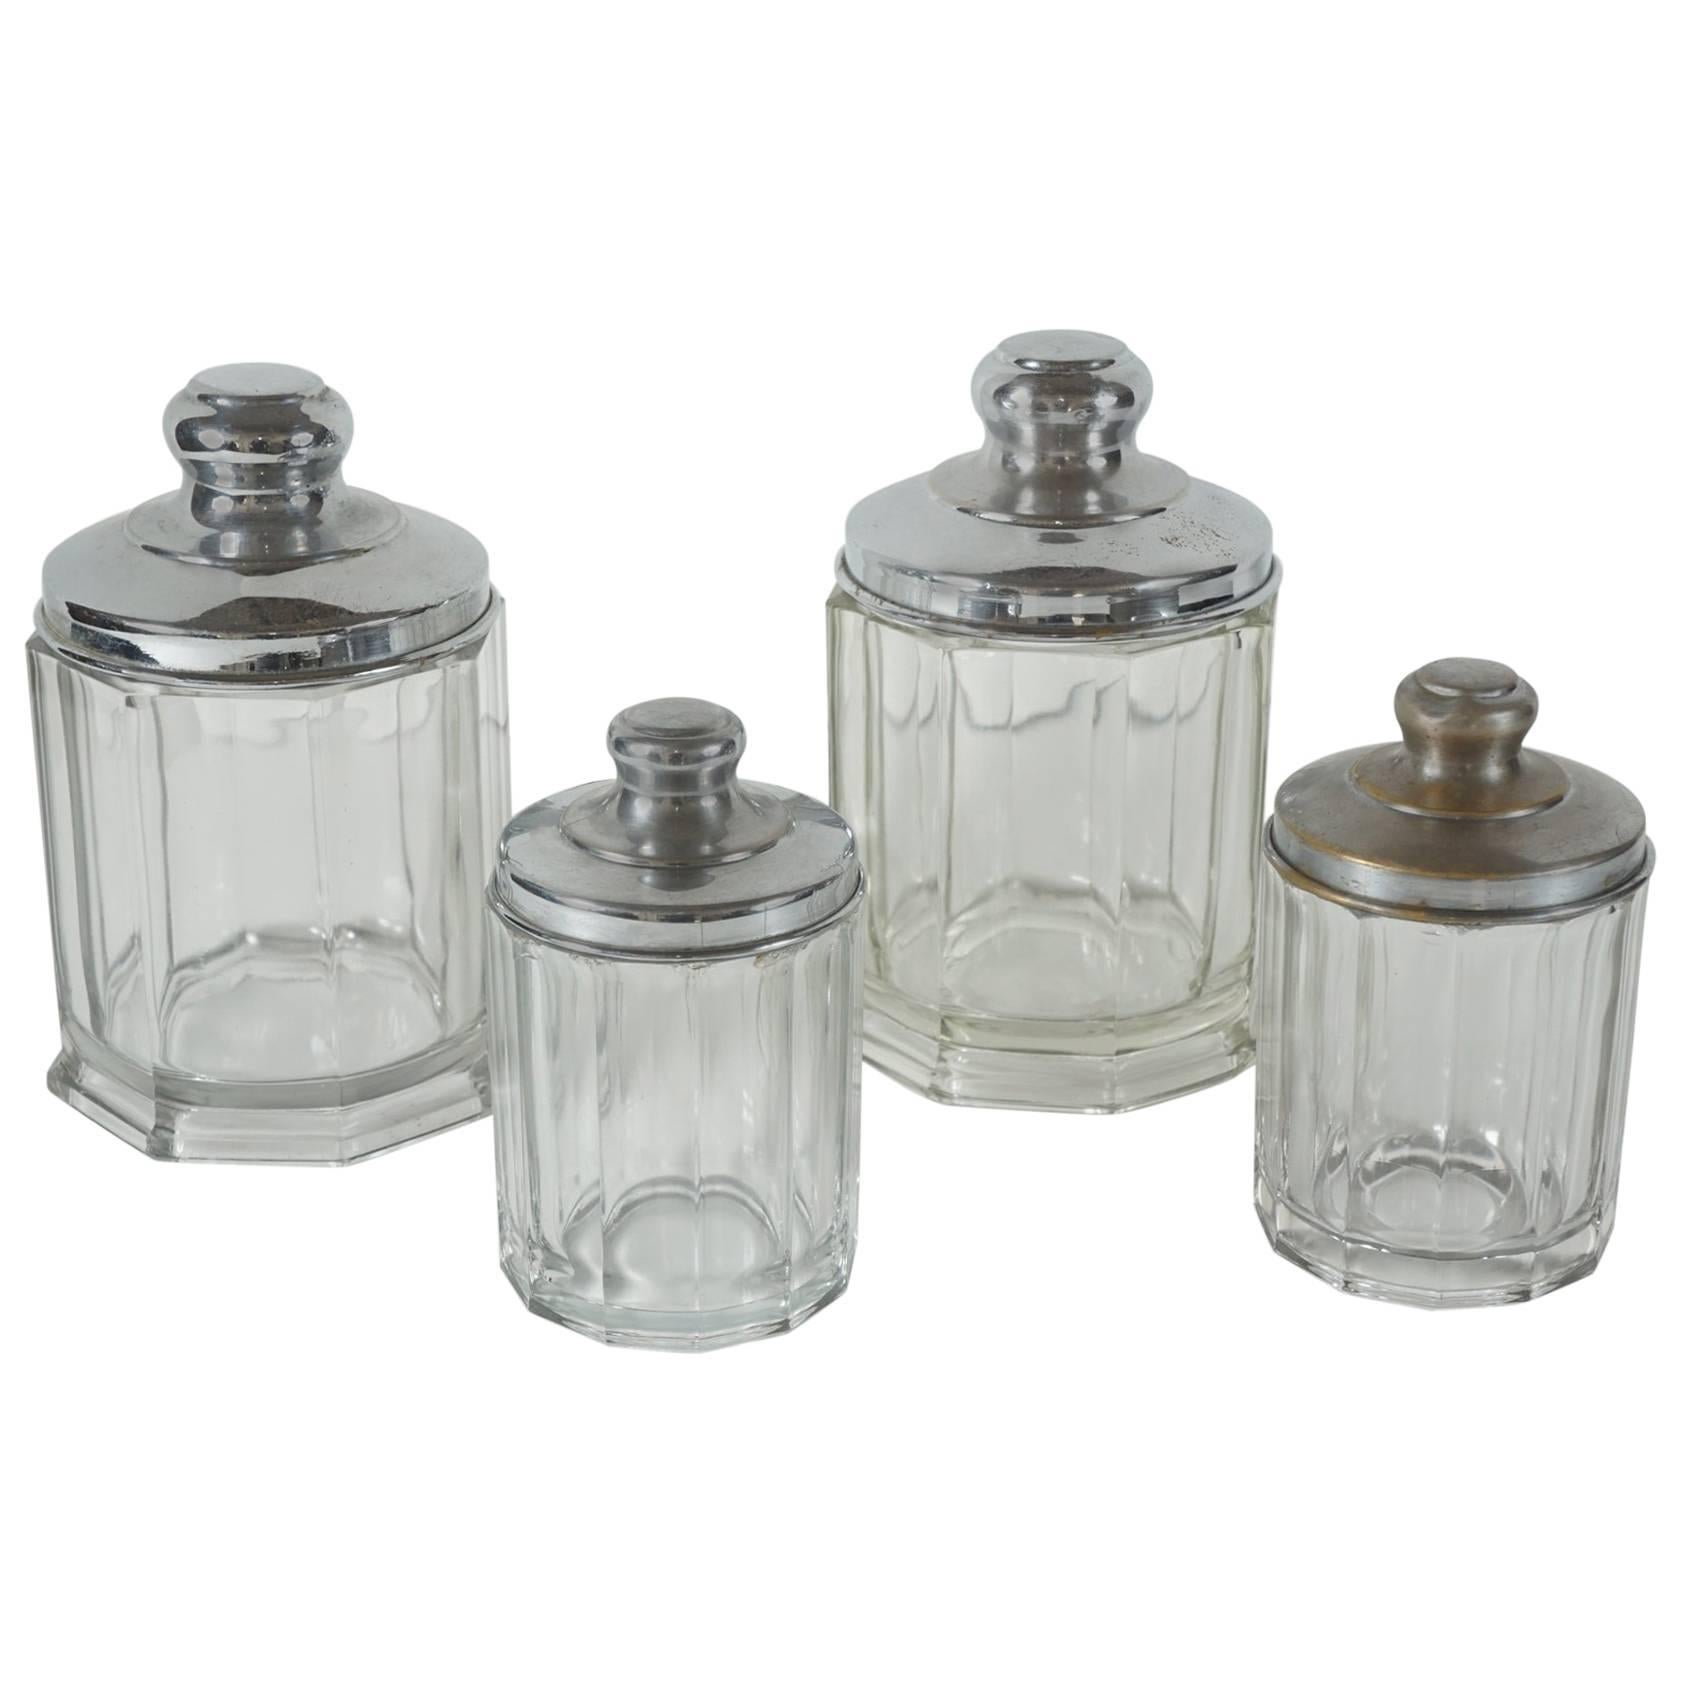 Early 20th Century Glass Canister Jars from the Estate of Bunny Mellon